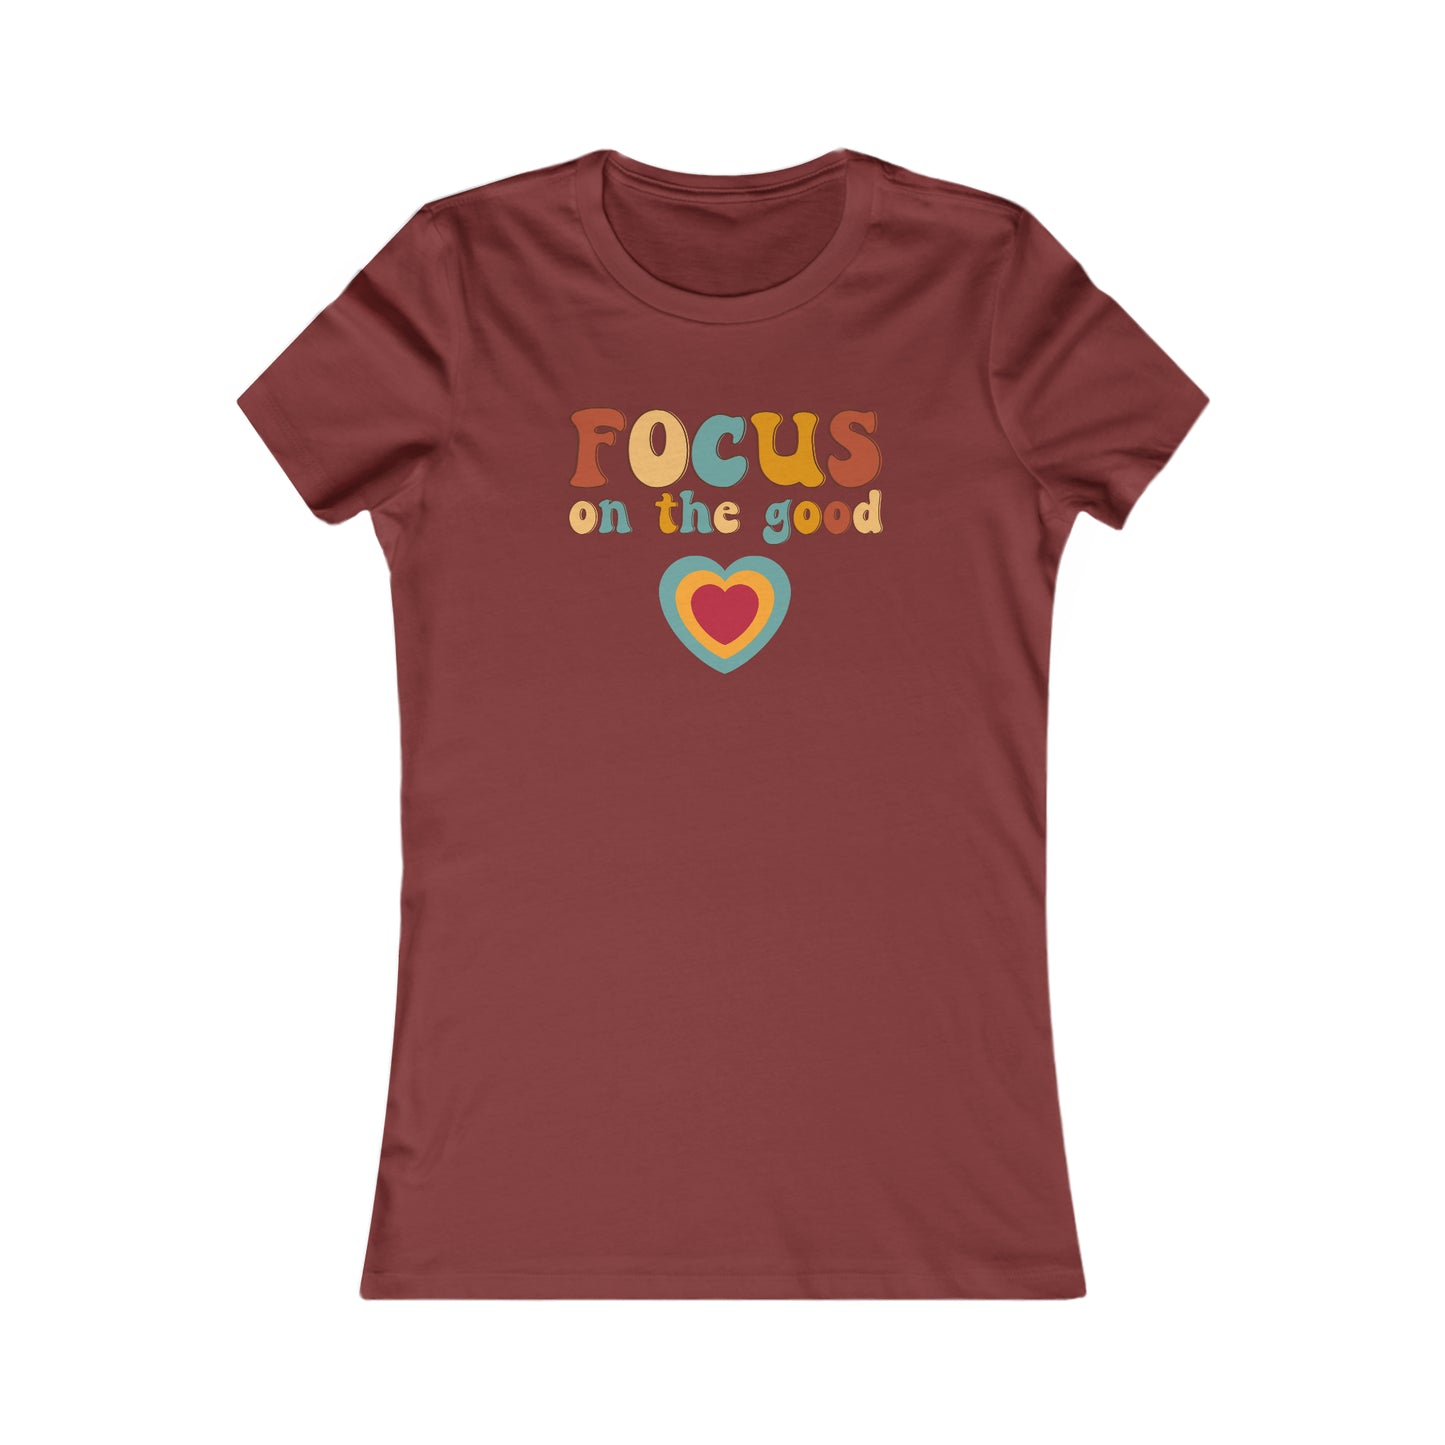 Colorful and hip “Focus on the good” message in the center of this Women's Favorite Tee design. Slim fit so please check the size table.